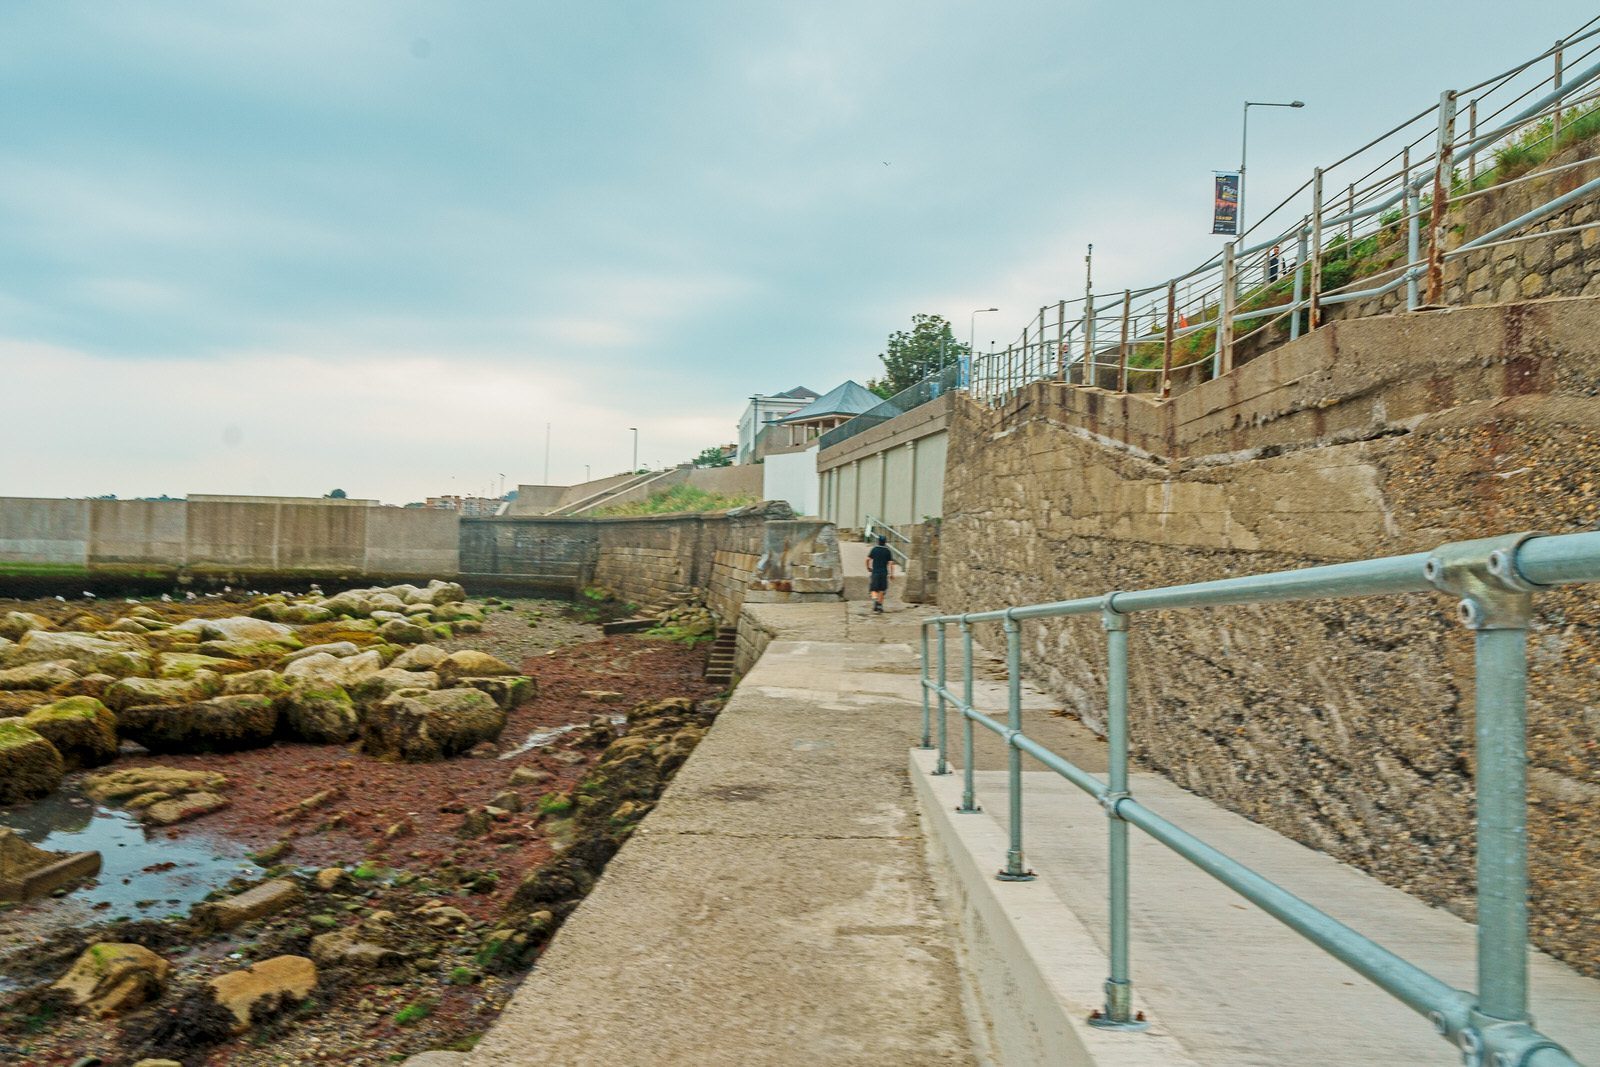 BETWEEN DUN LAOGHAIRE EAST PIER AND THE BATHS [THIS AREA HAS BEEN BADLY NEGLECTED] 002